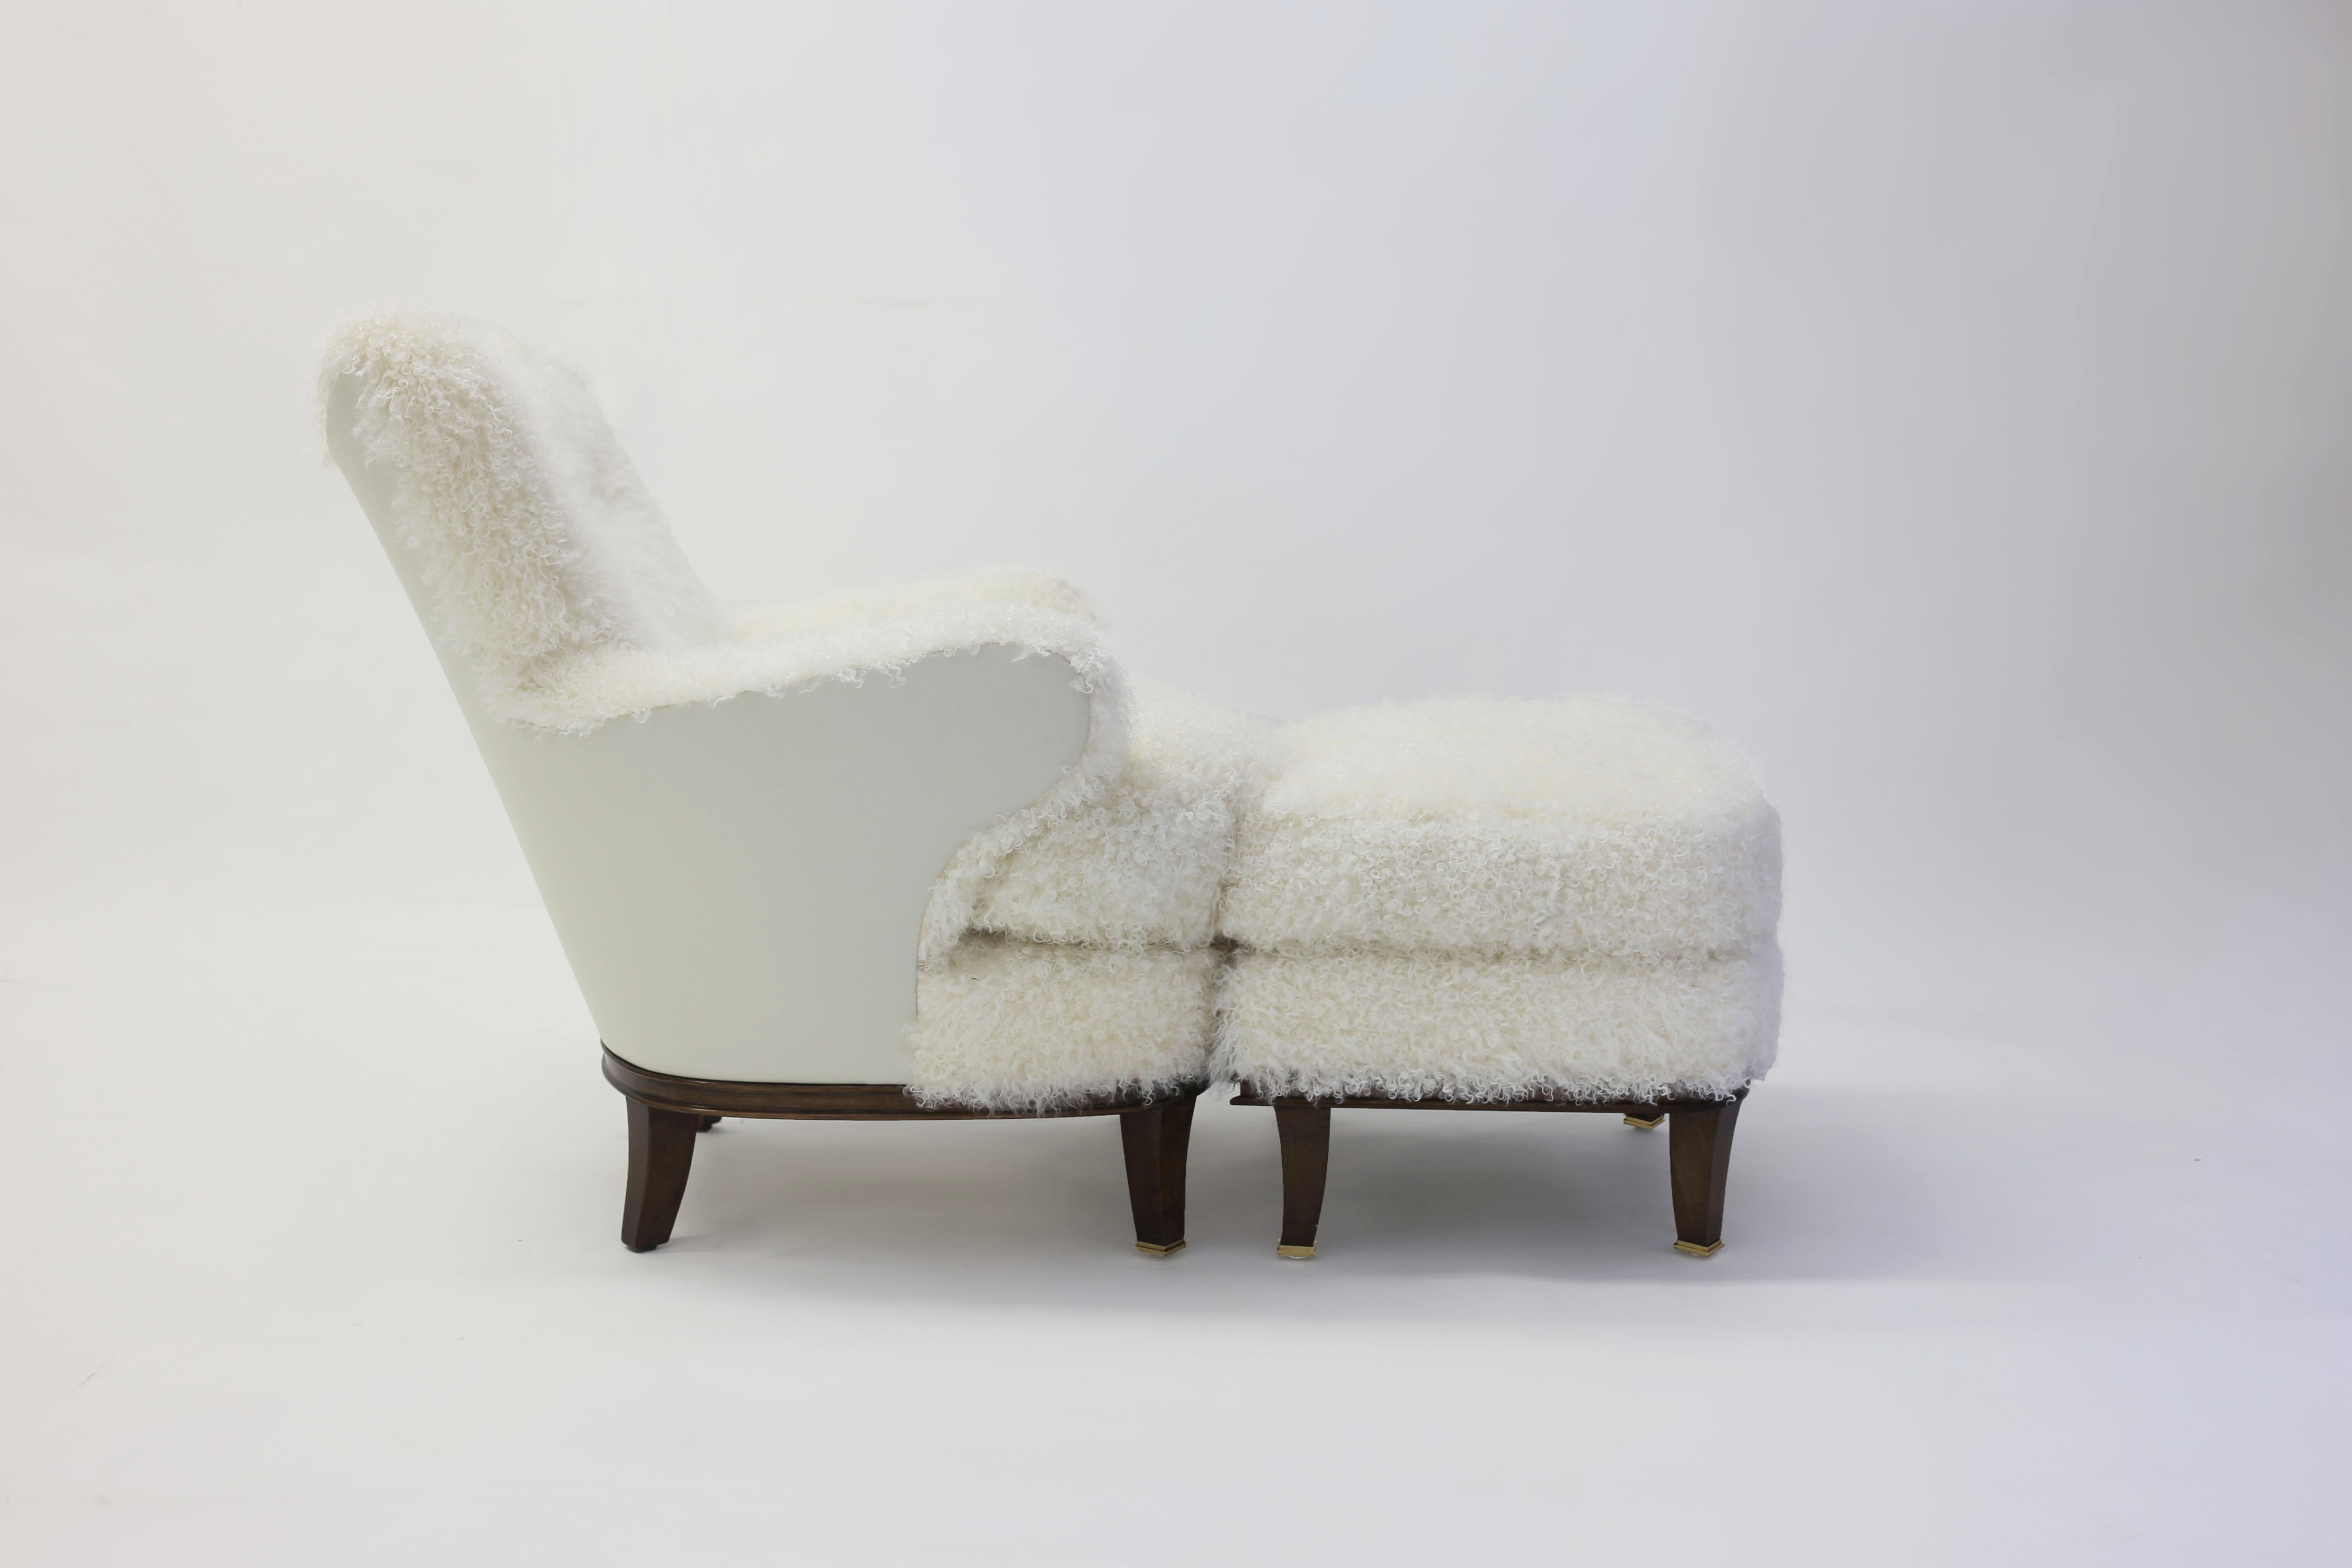 Sheepskin Shearling Covered Shaped Back Chair with Wood Base and Legs with Metal Cap Feet  For Sale